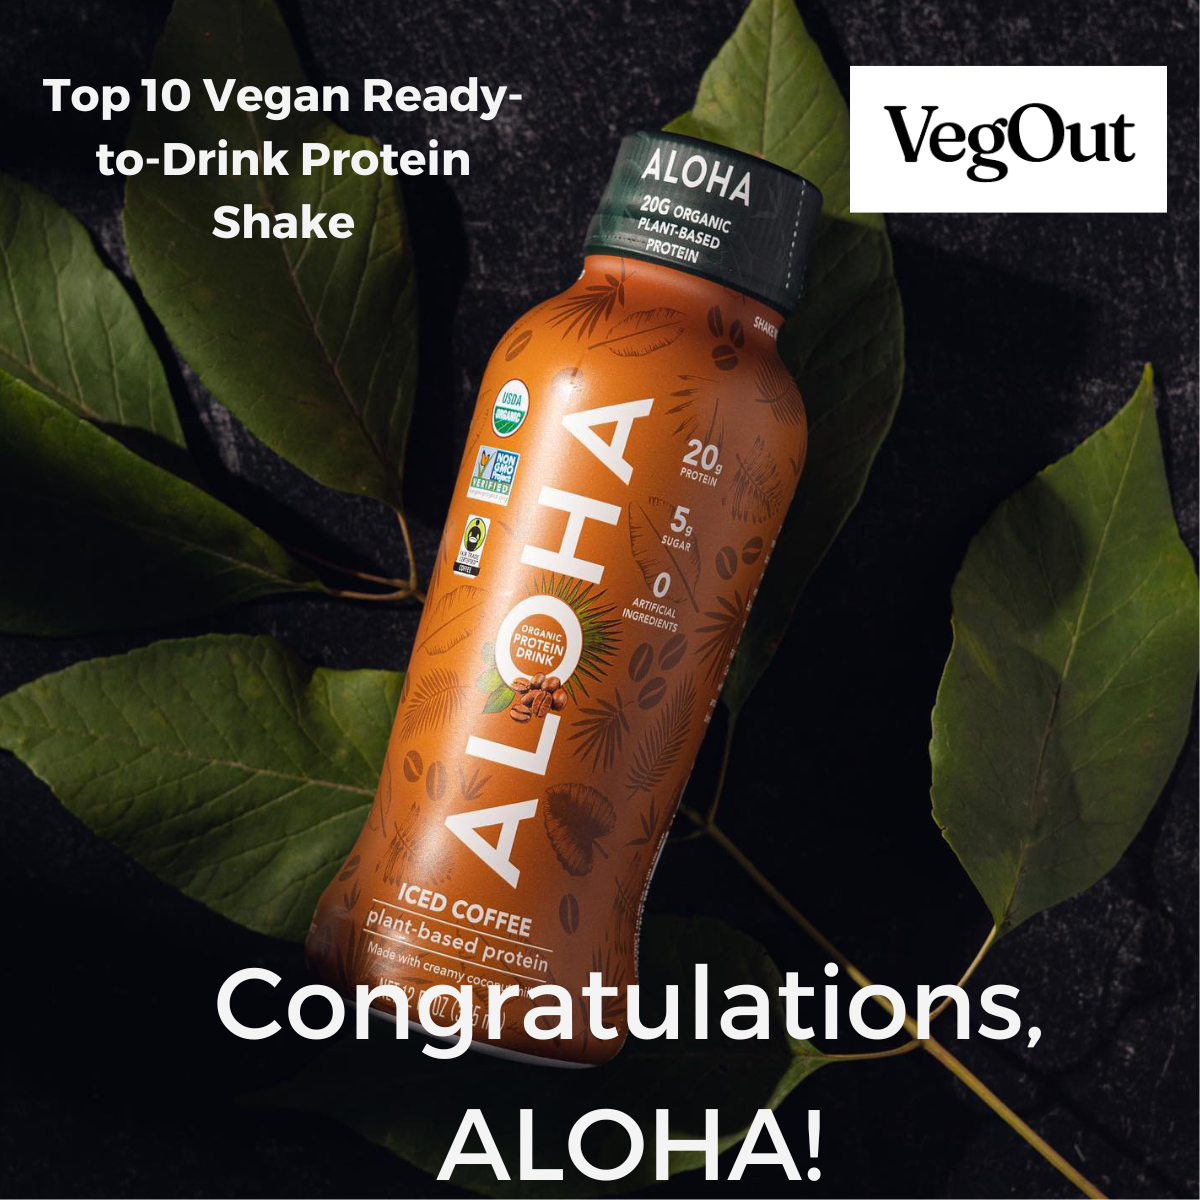 The 10 Best Vegan Ready-to-Drink Protein Shakes